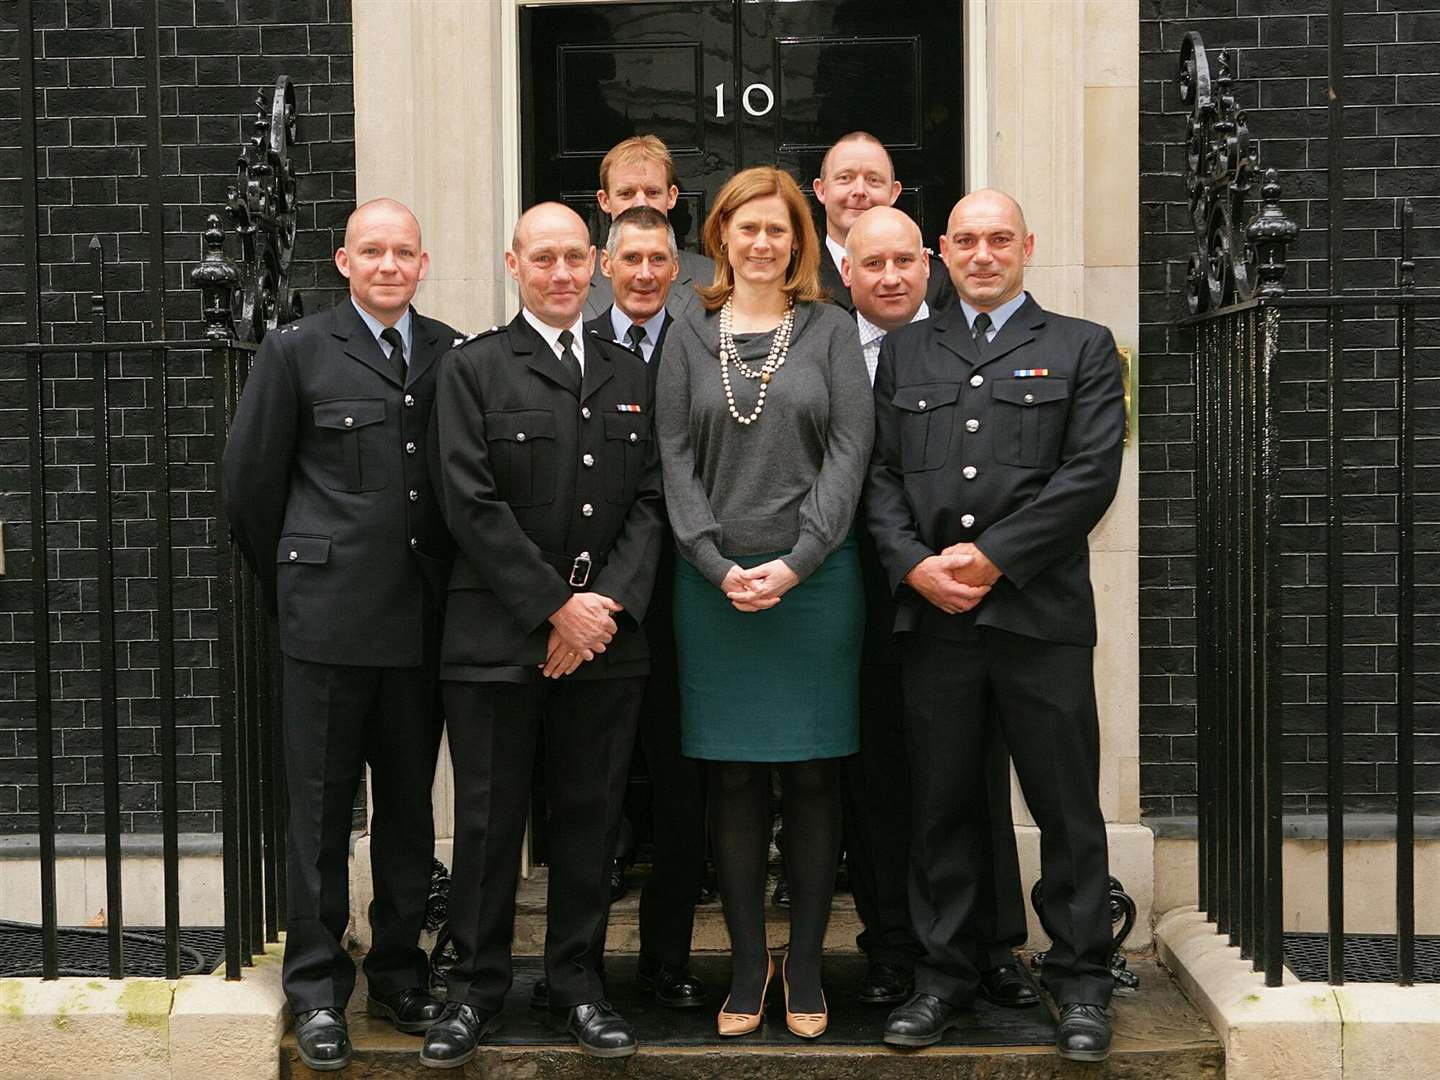 Malcolm Cowie (front row, second from left) with other Kent firefighters who were thanked by Sarah Brown at Number 10 Downing Street for their efforts in Haiti Photo: West Midlands Fire and Rescue Service